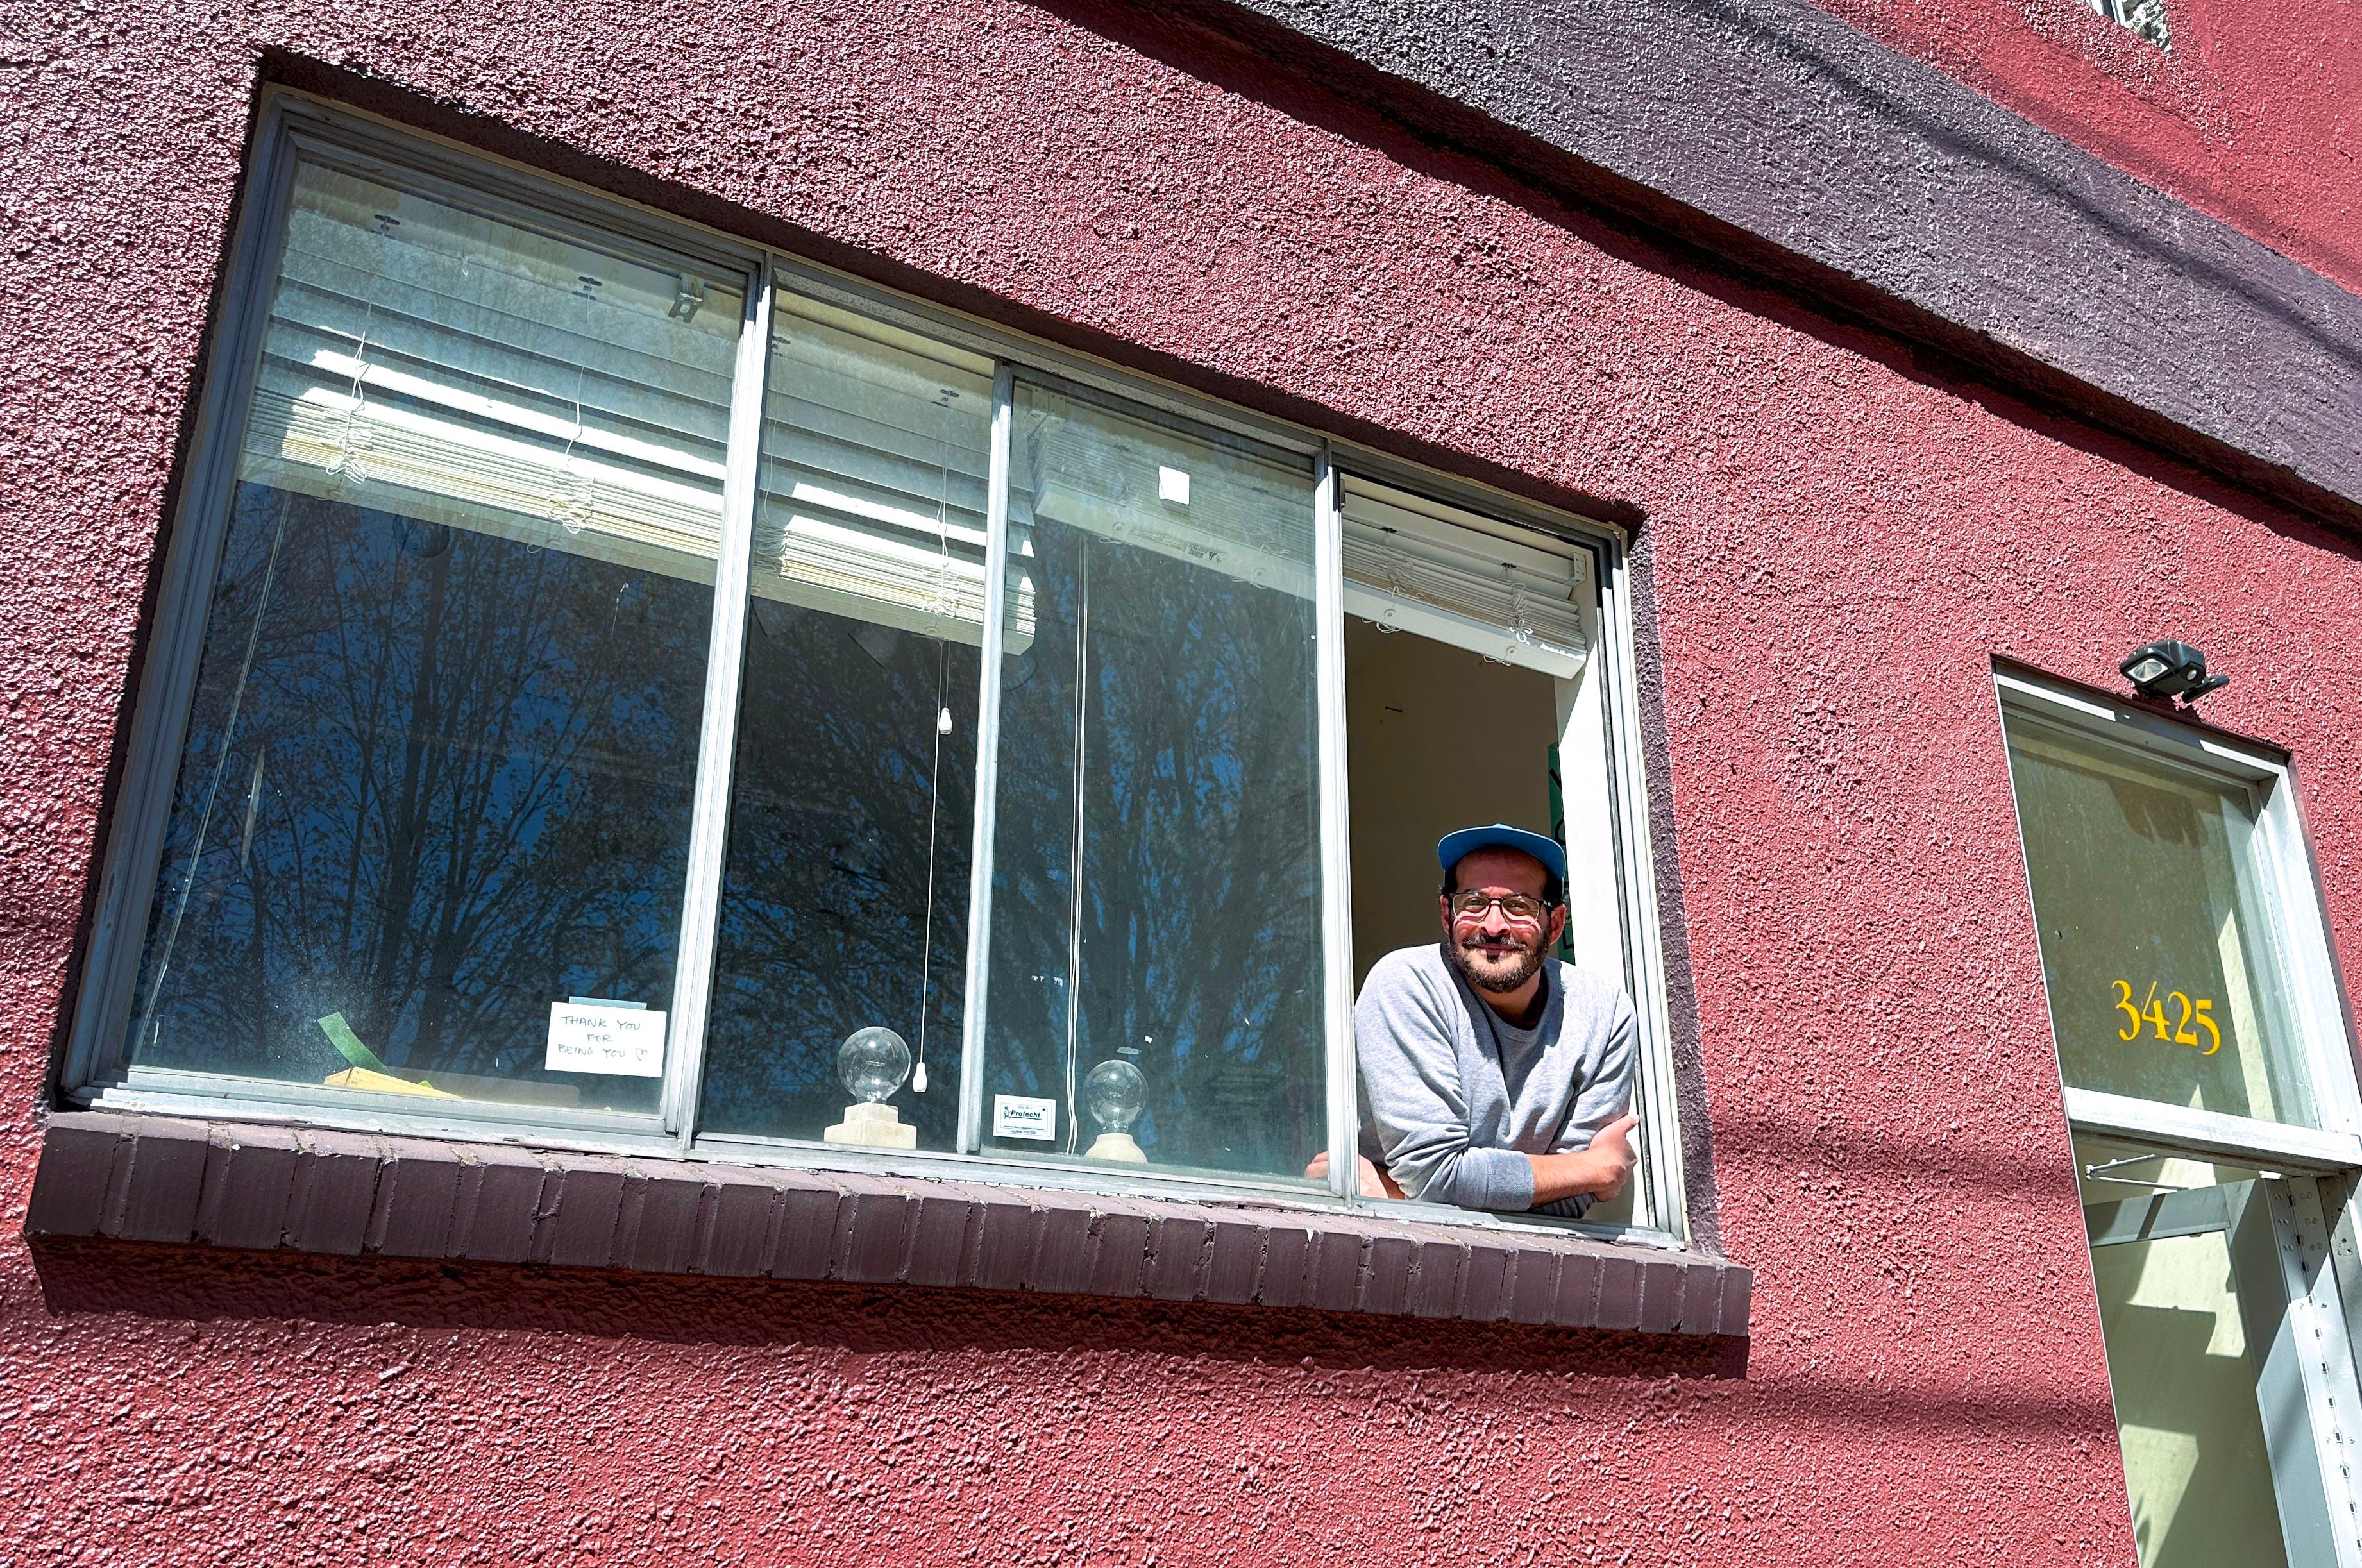 Anis Mojgani leans out the window of his Portland studio on April 17, 2024. He sometimes does poetry readings here at sunset.